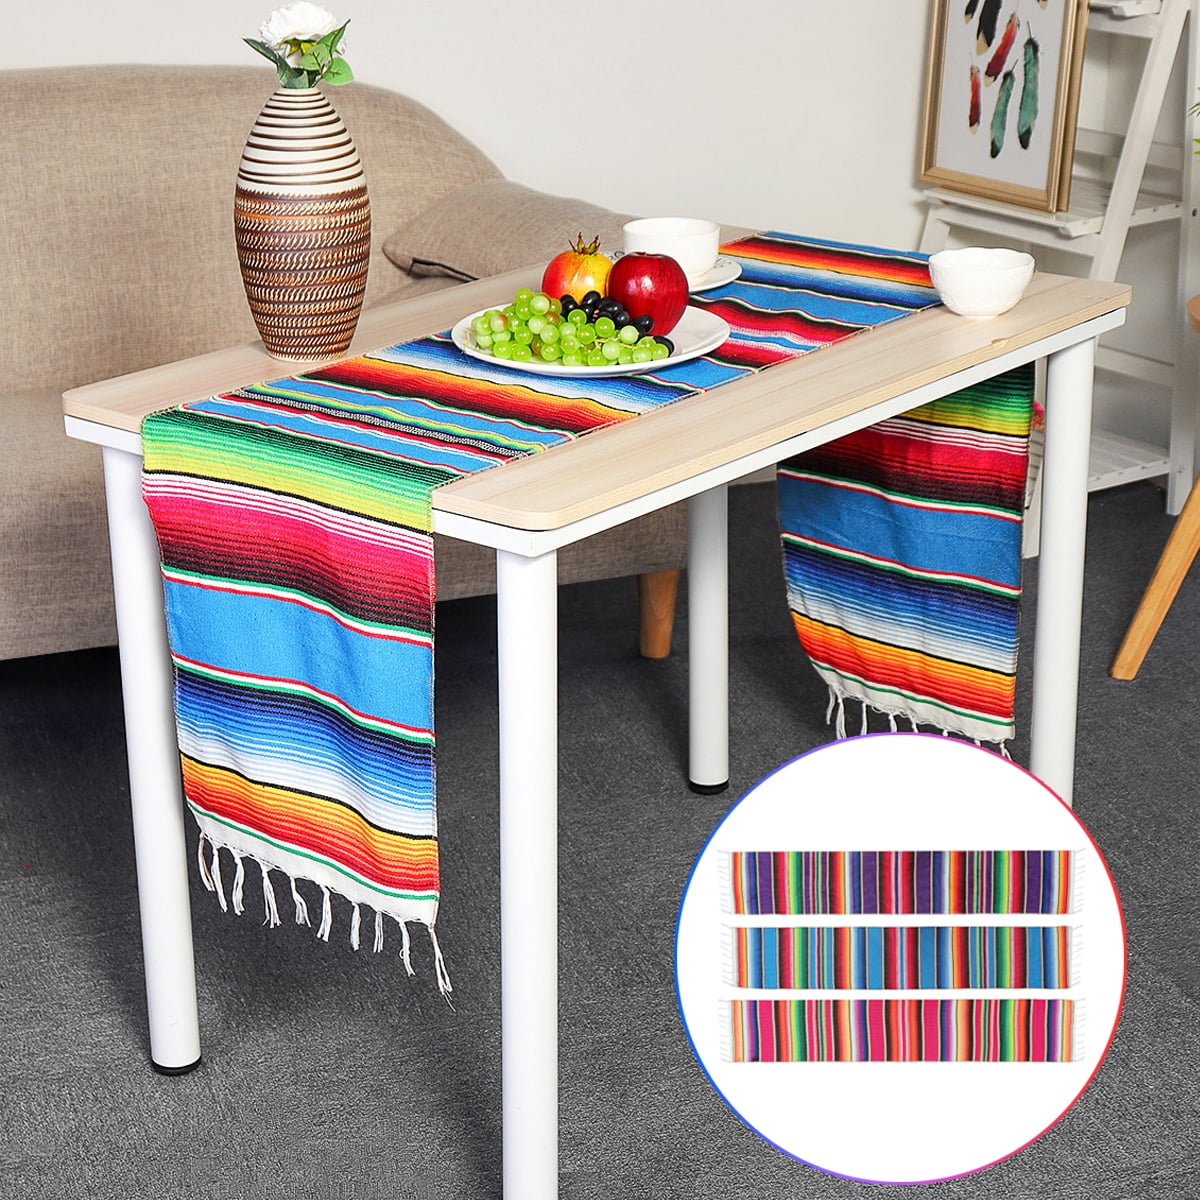 YZEO Mexican Table Runner 14x84 for Mexican Fiesta Themed Birthday Dinner Party